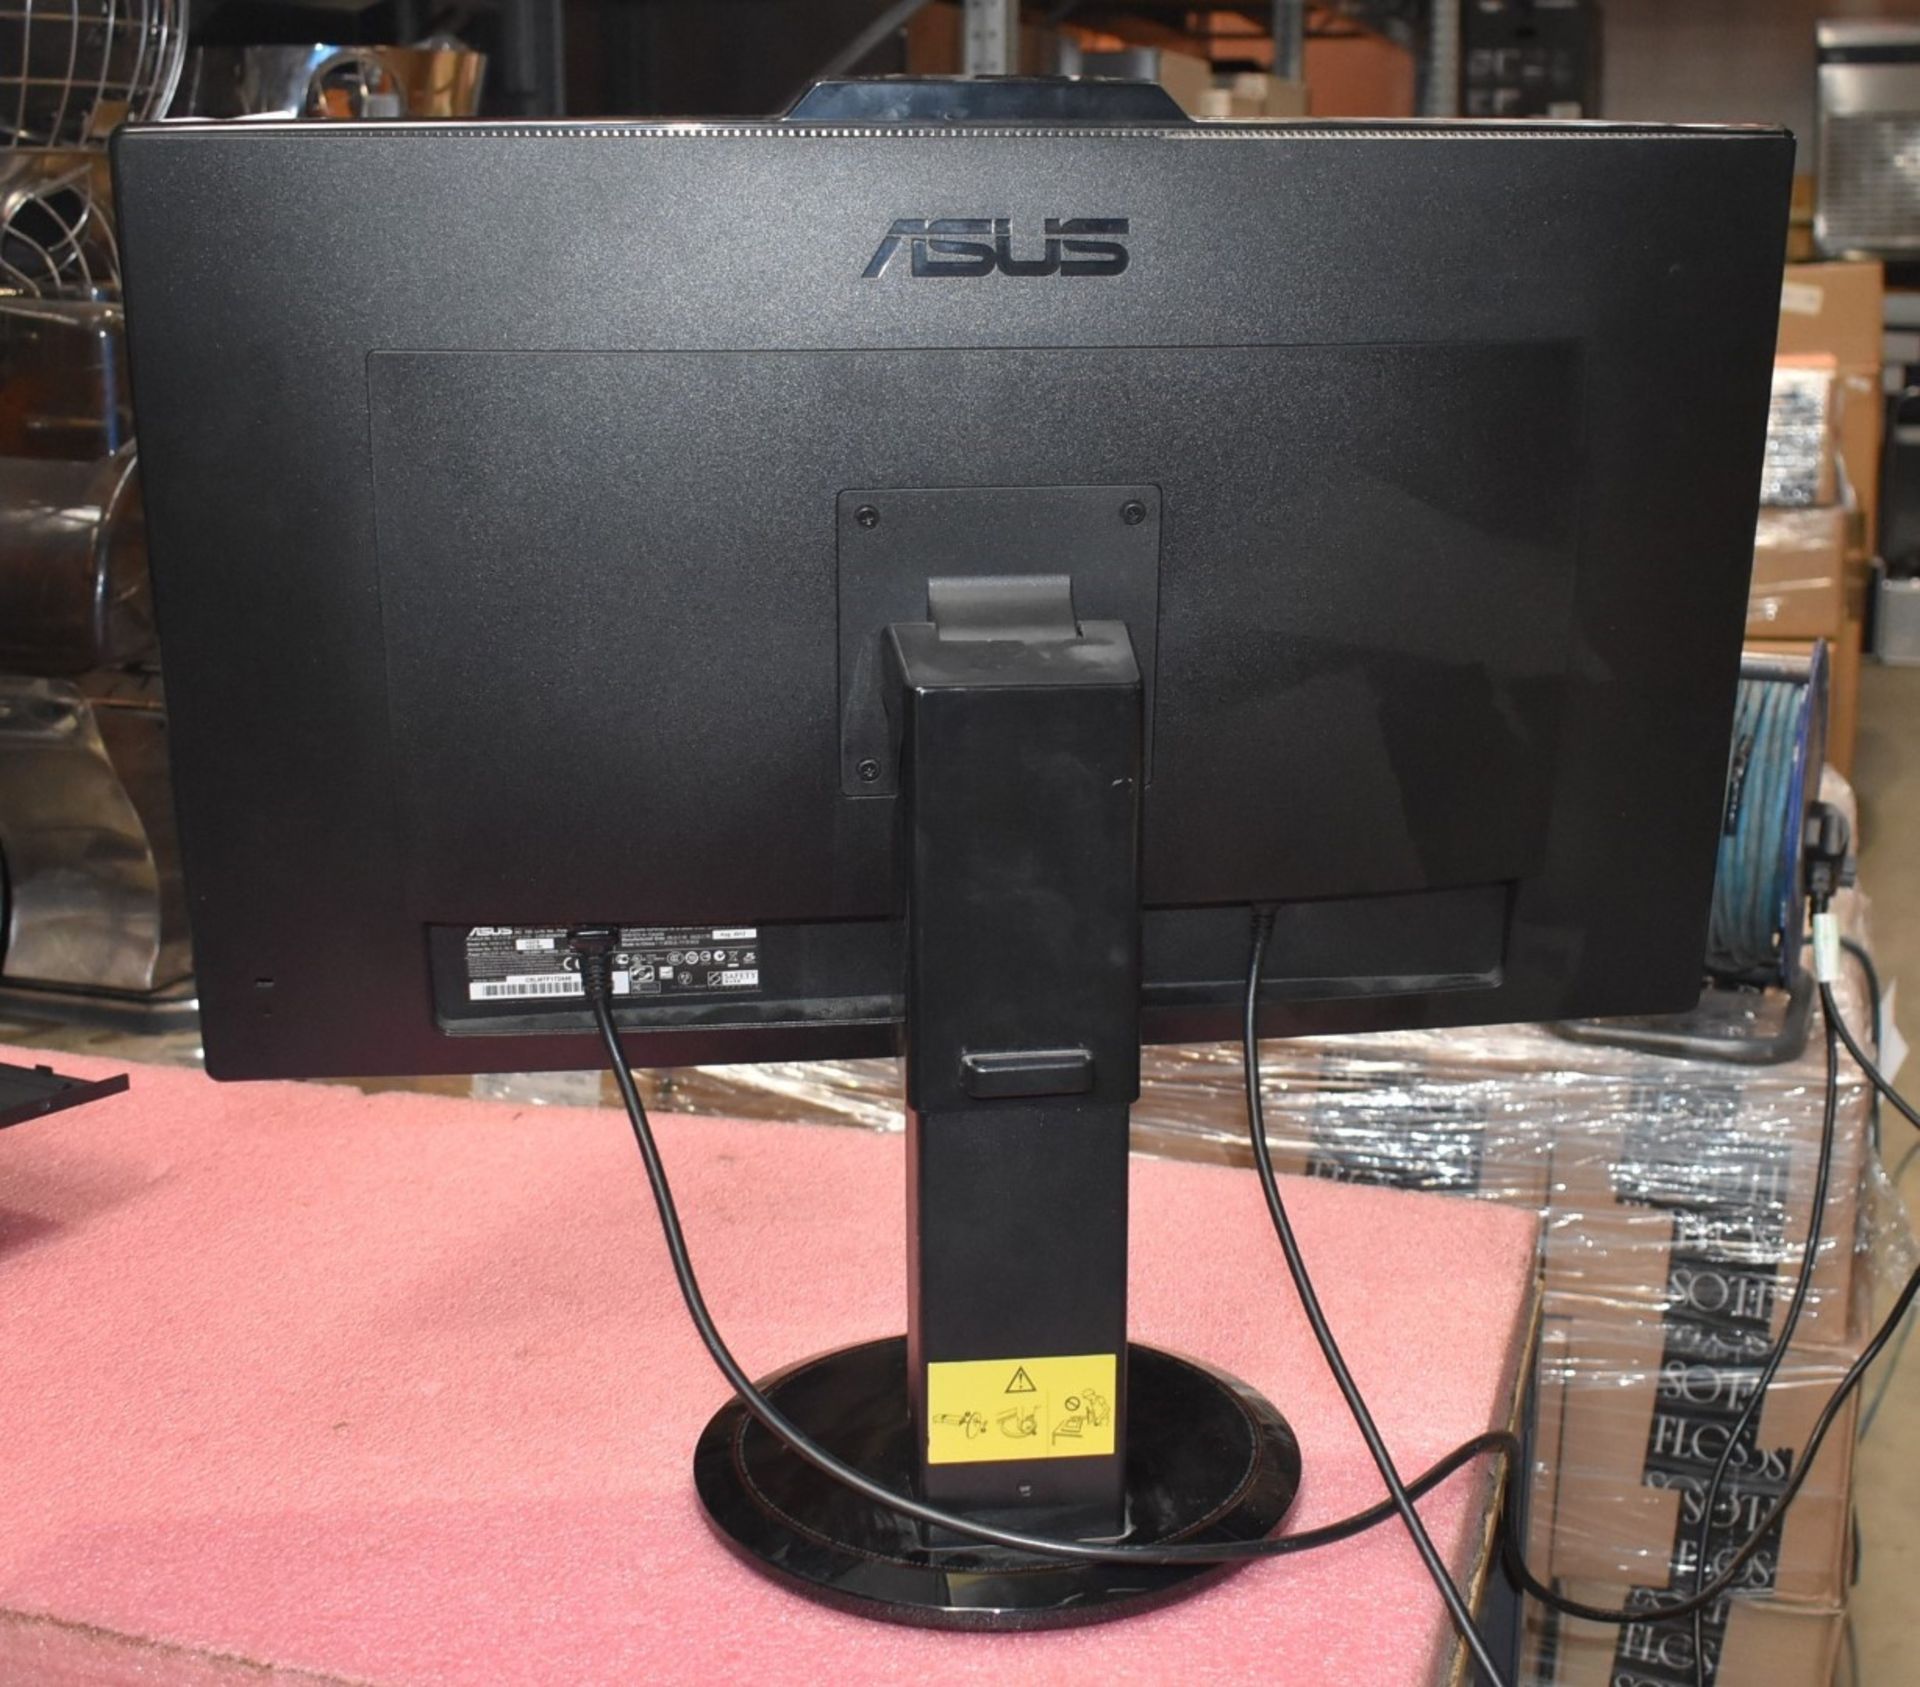 1 x Asus VG Series 27 Inch Full HD Gaming Monitor - 3D Games and Video Ready - Model VG278 - Image 4 of 6